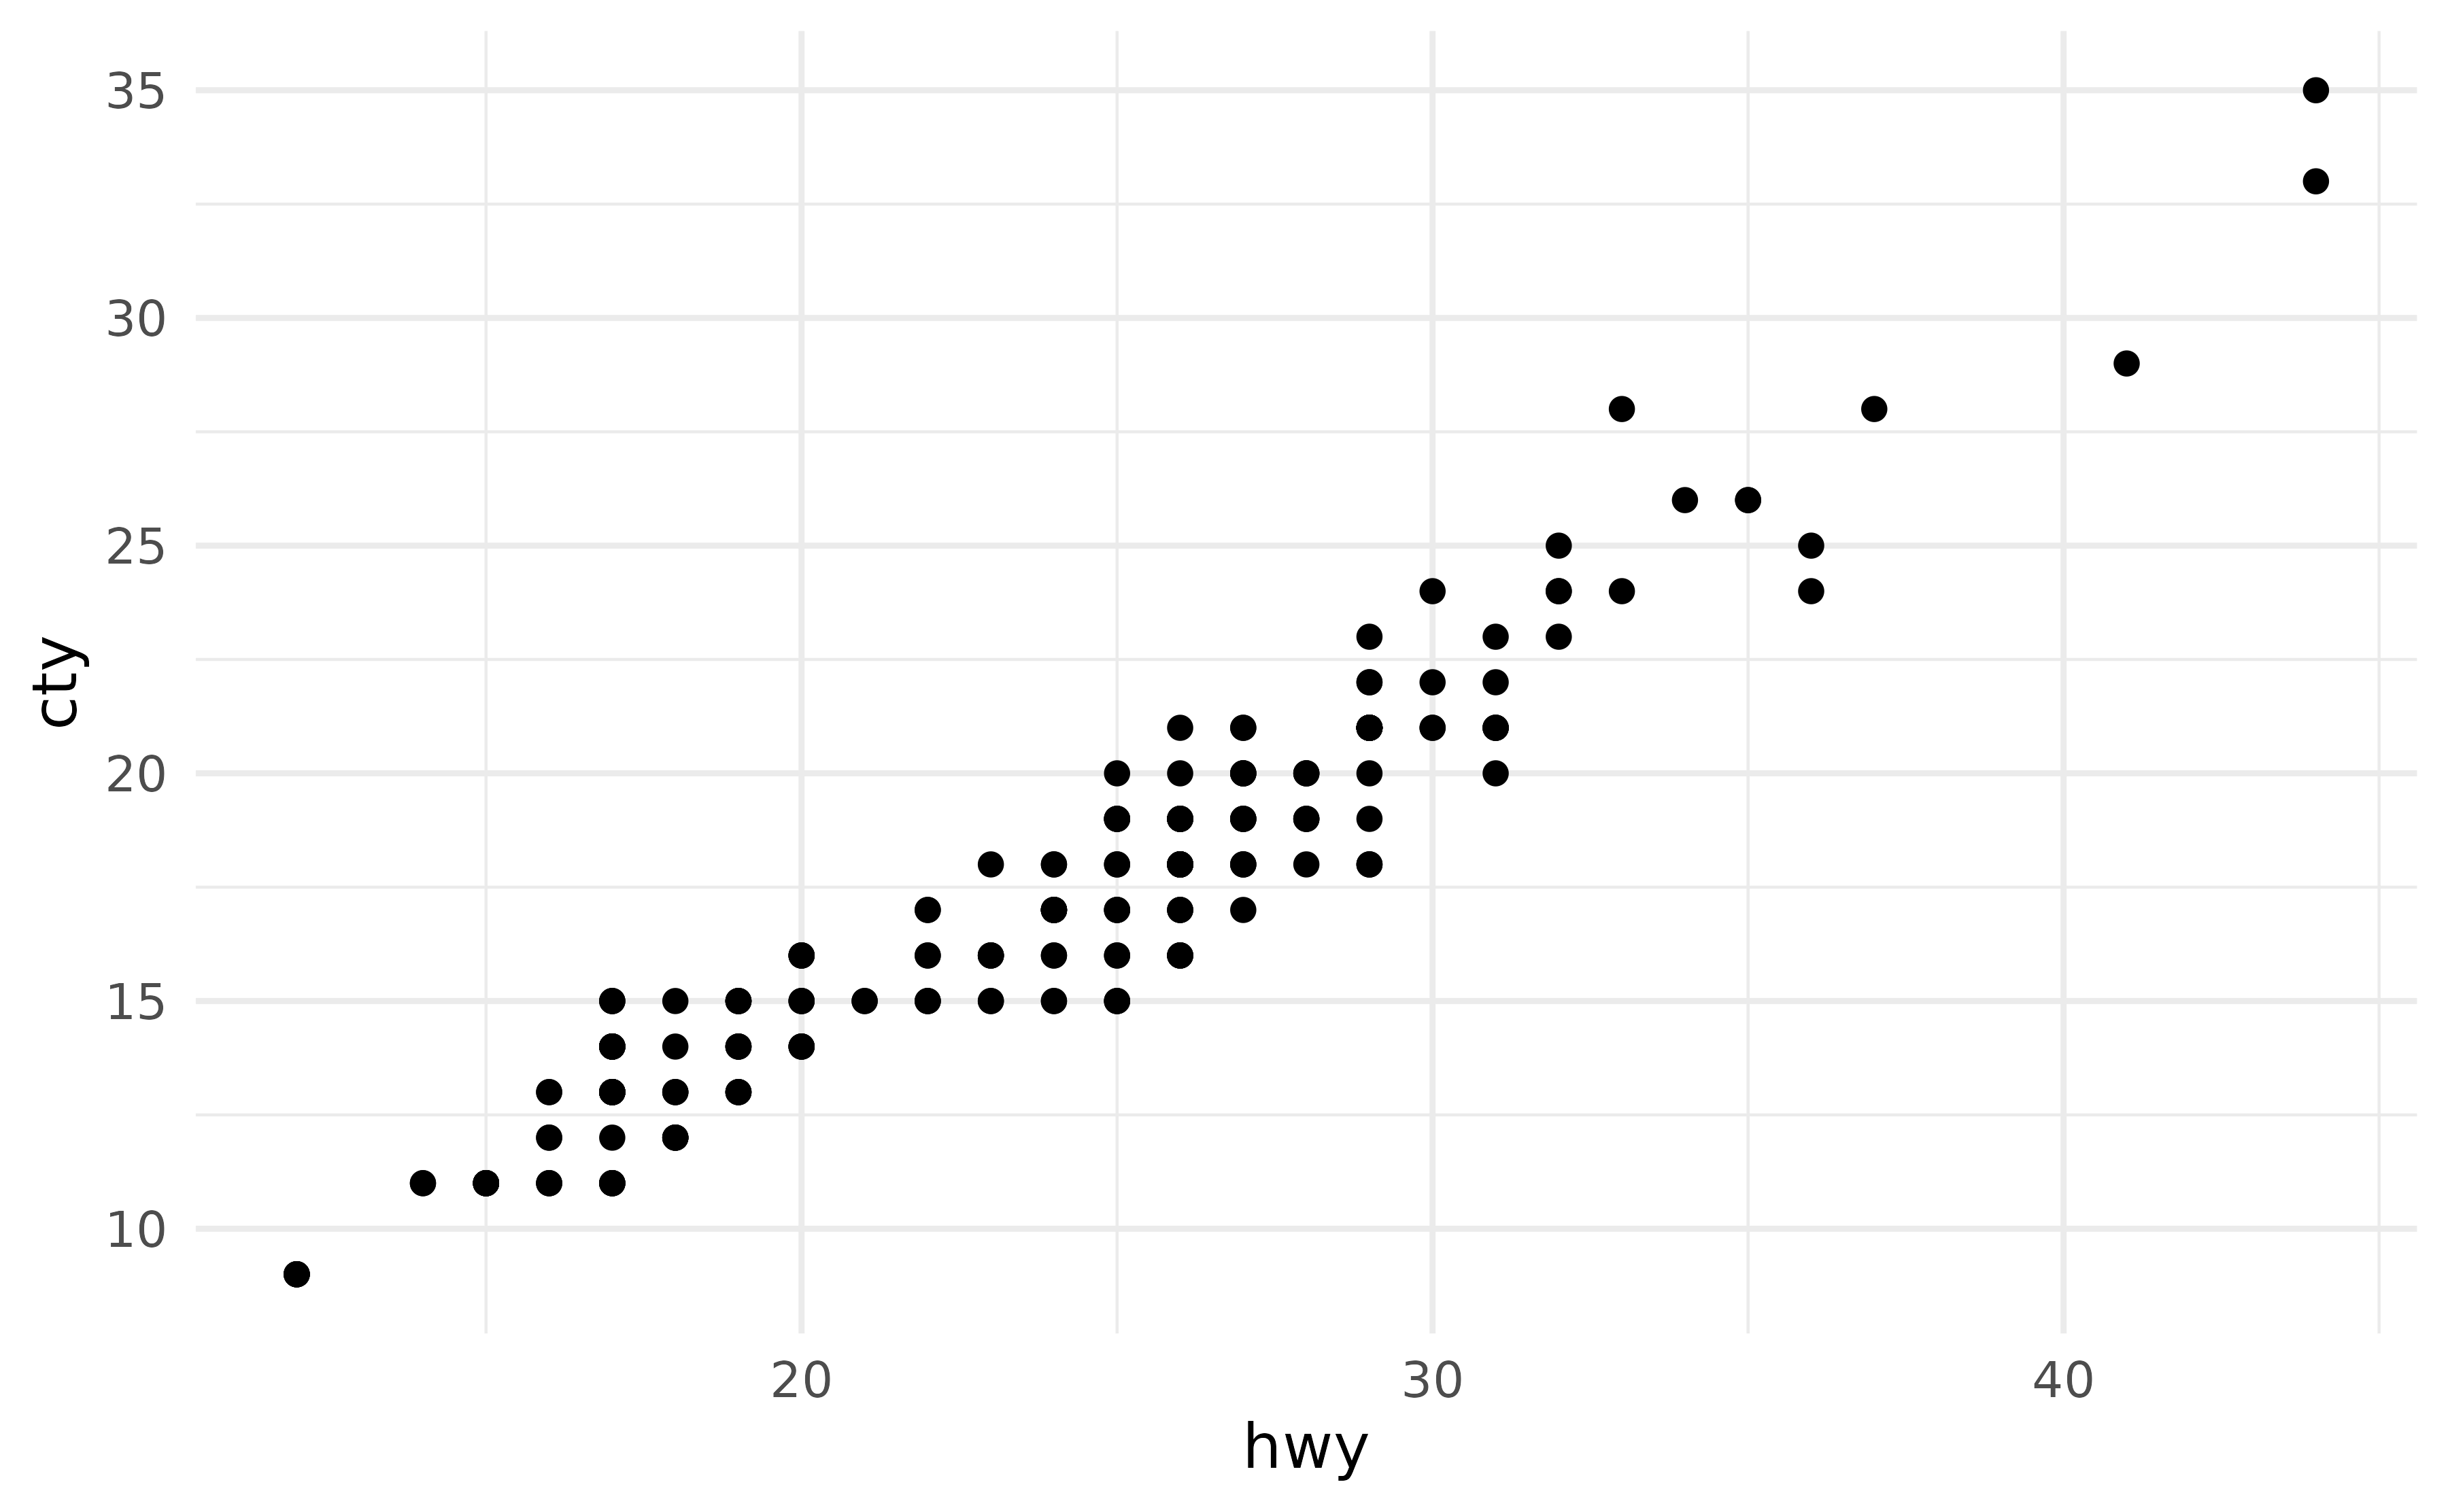 A scatter plot showing the highway miles per gallon on the x-axis and city miles per gallon on the y-axis. There is no visible panel background and grid lines are in light grey.